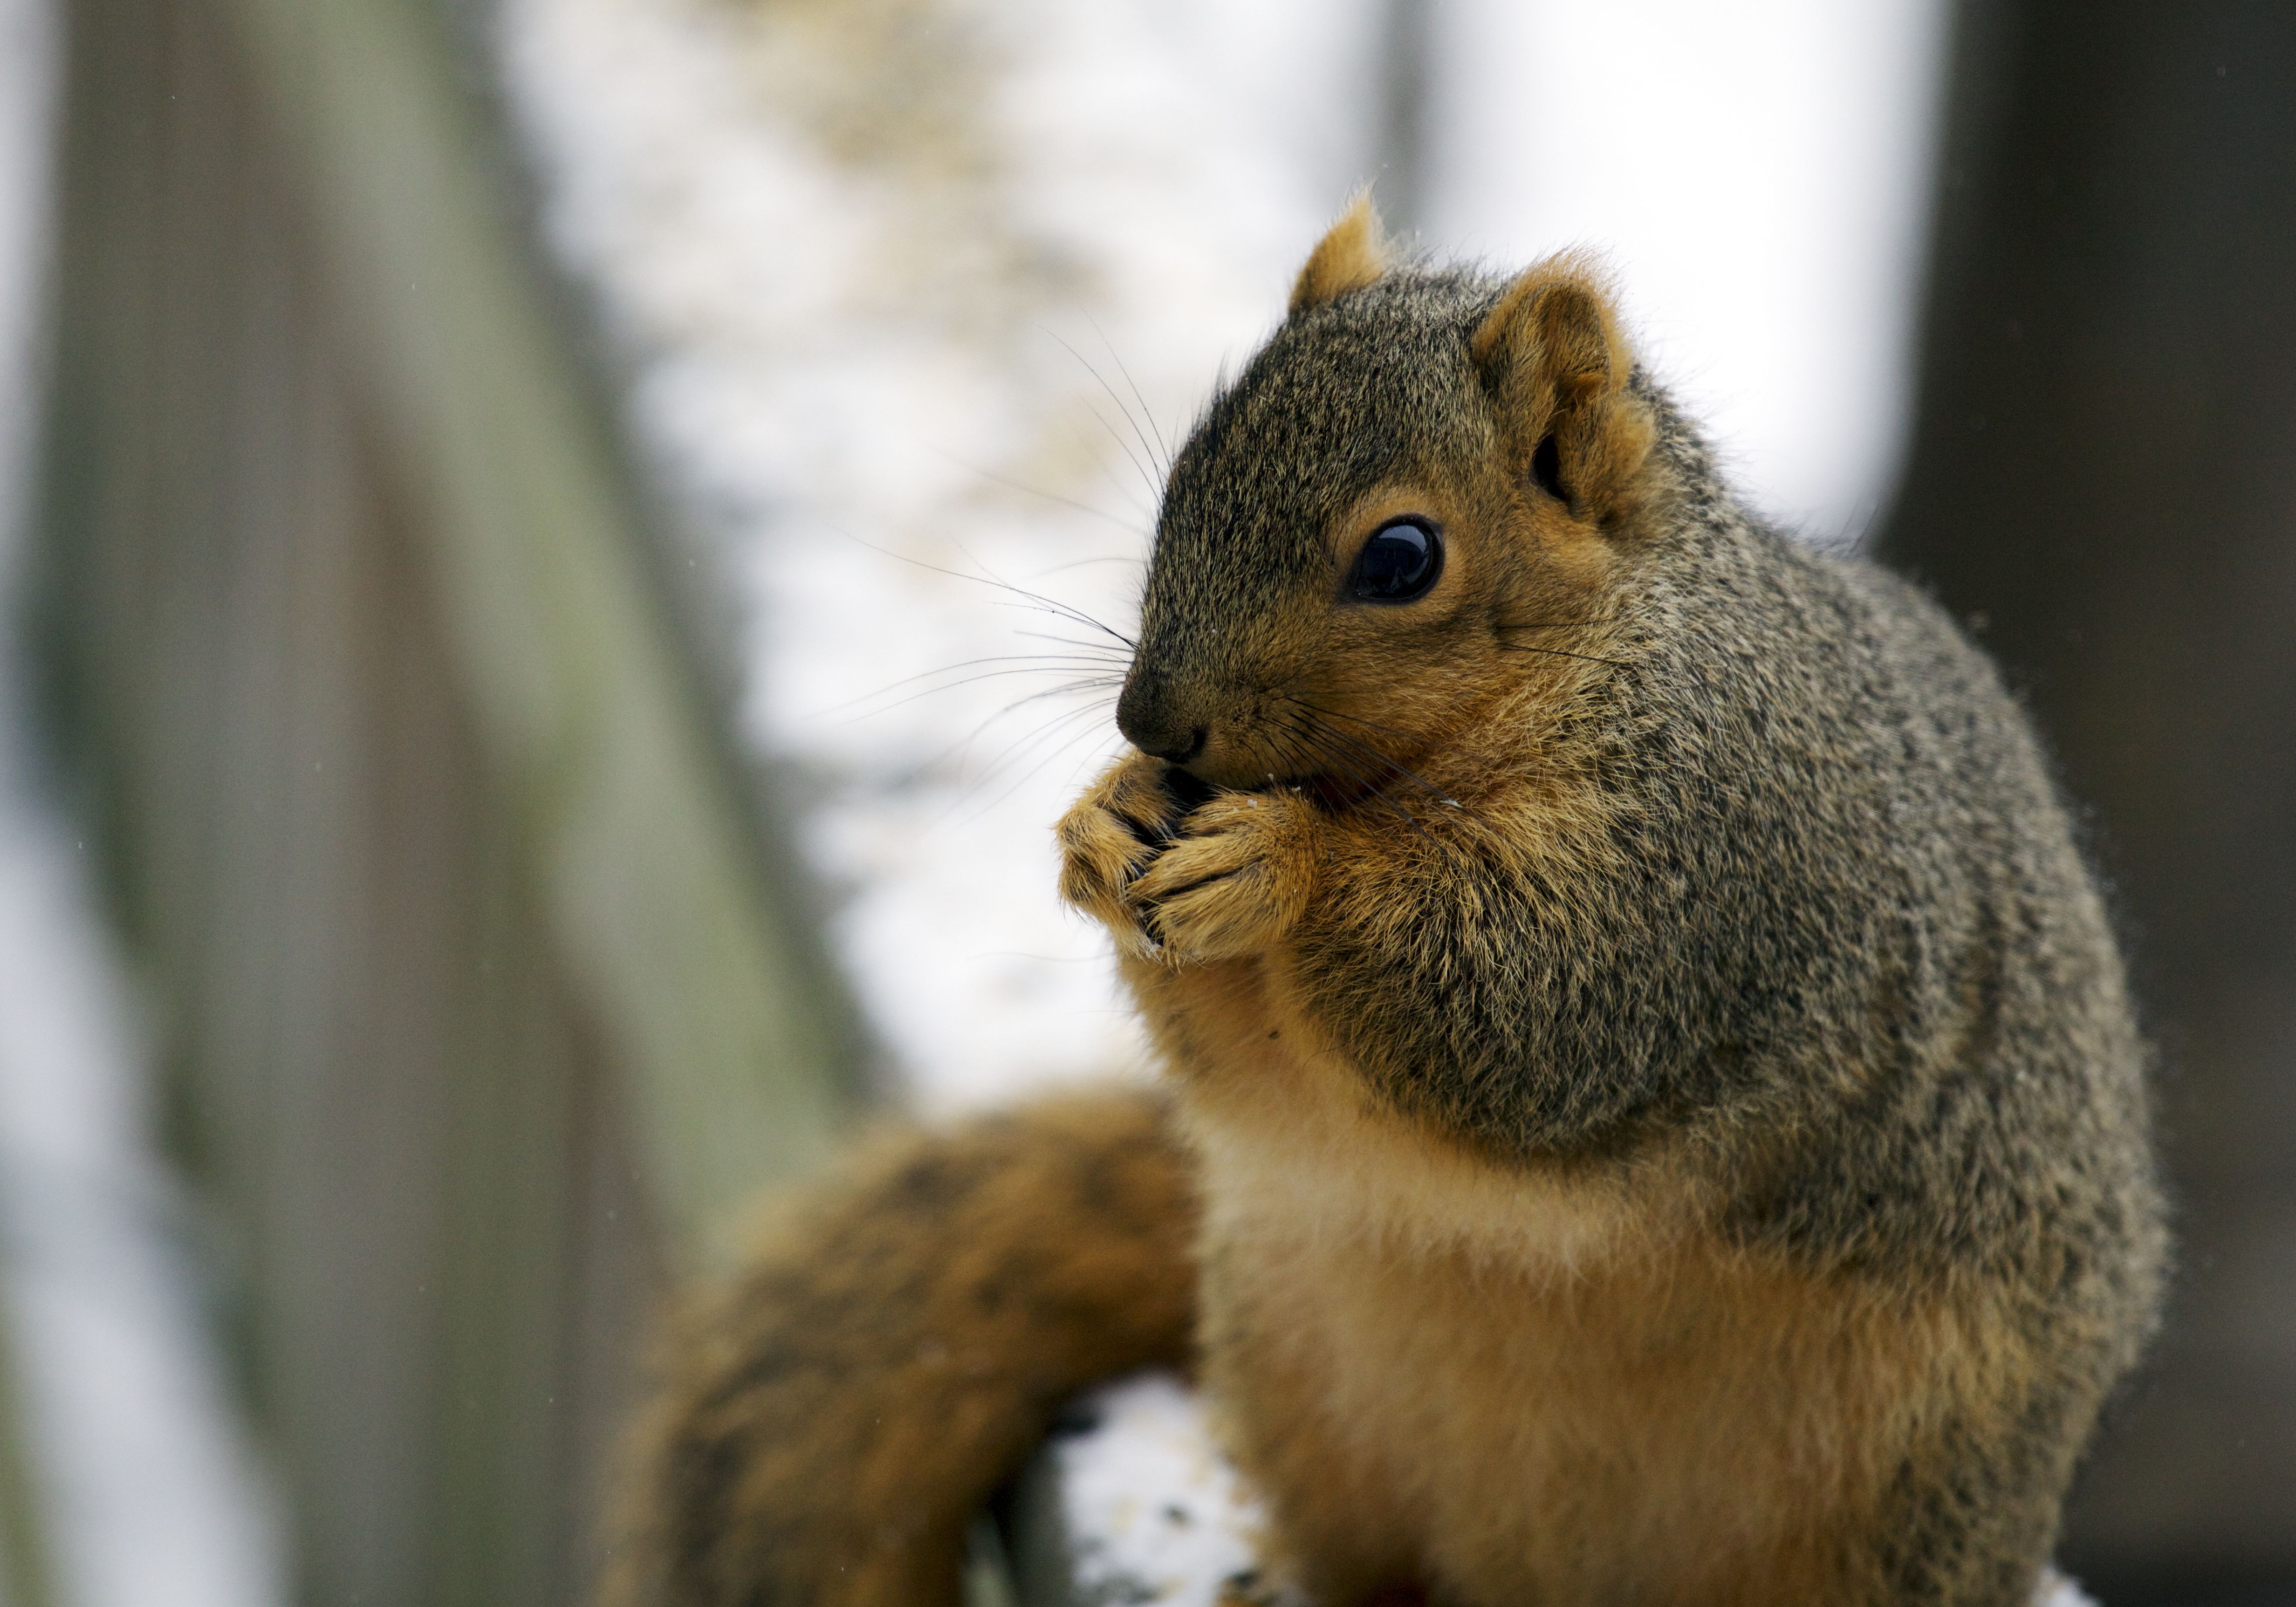 Download wallpaper 4927x3449 squirrel, eat, fat, animal HD background